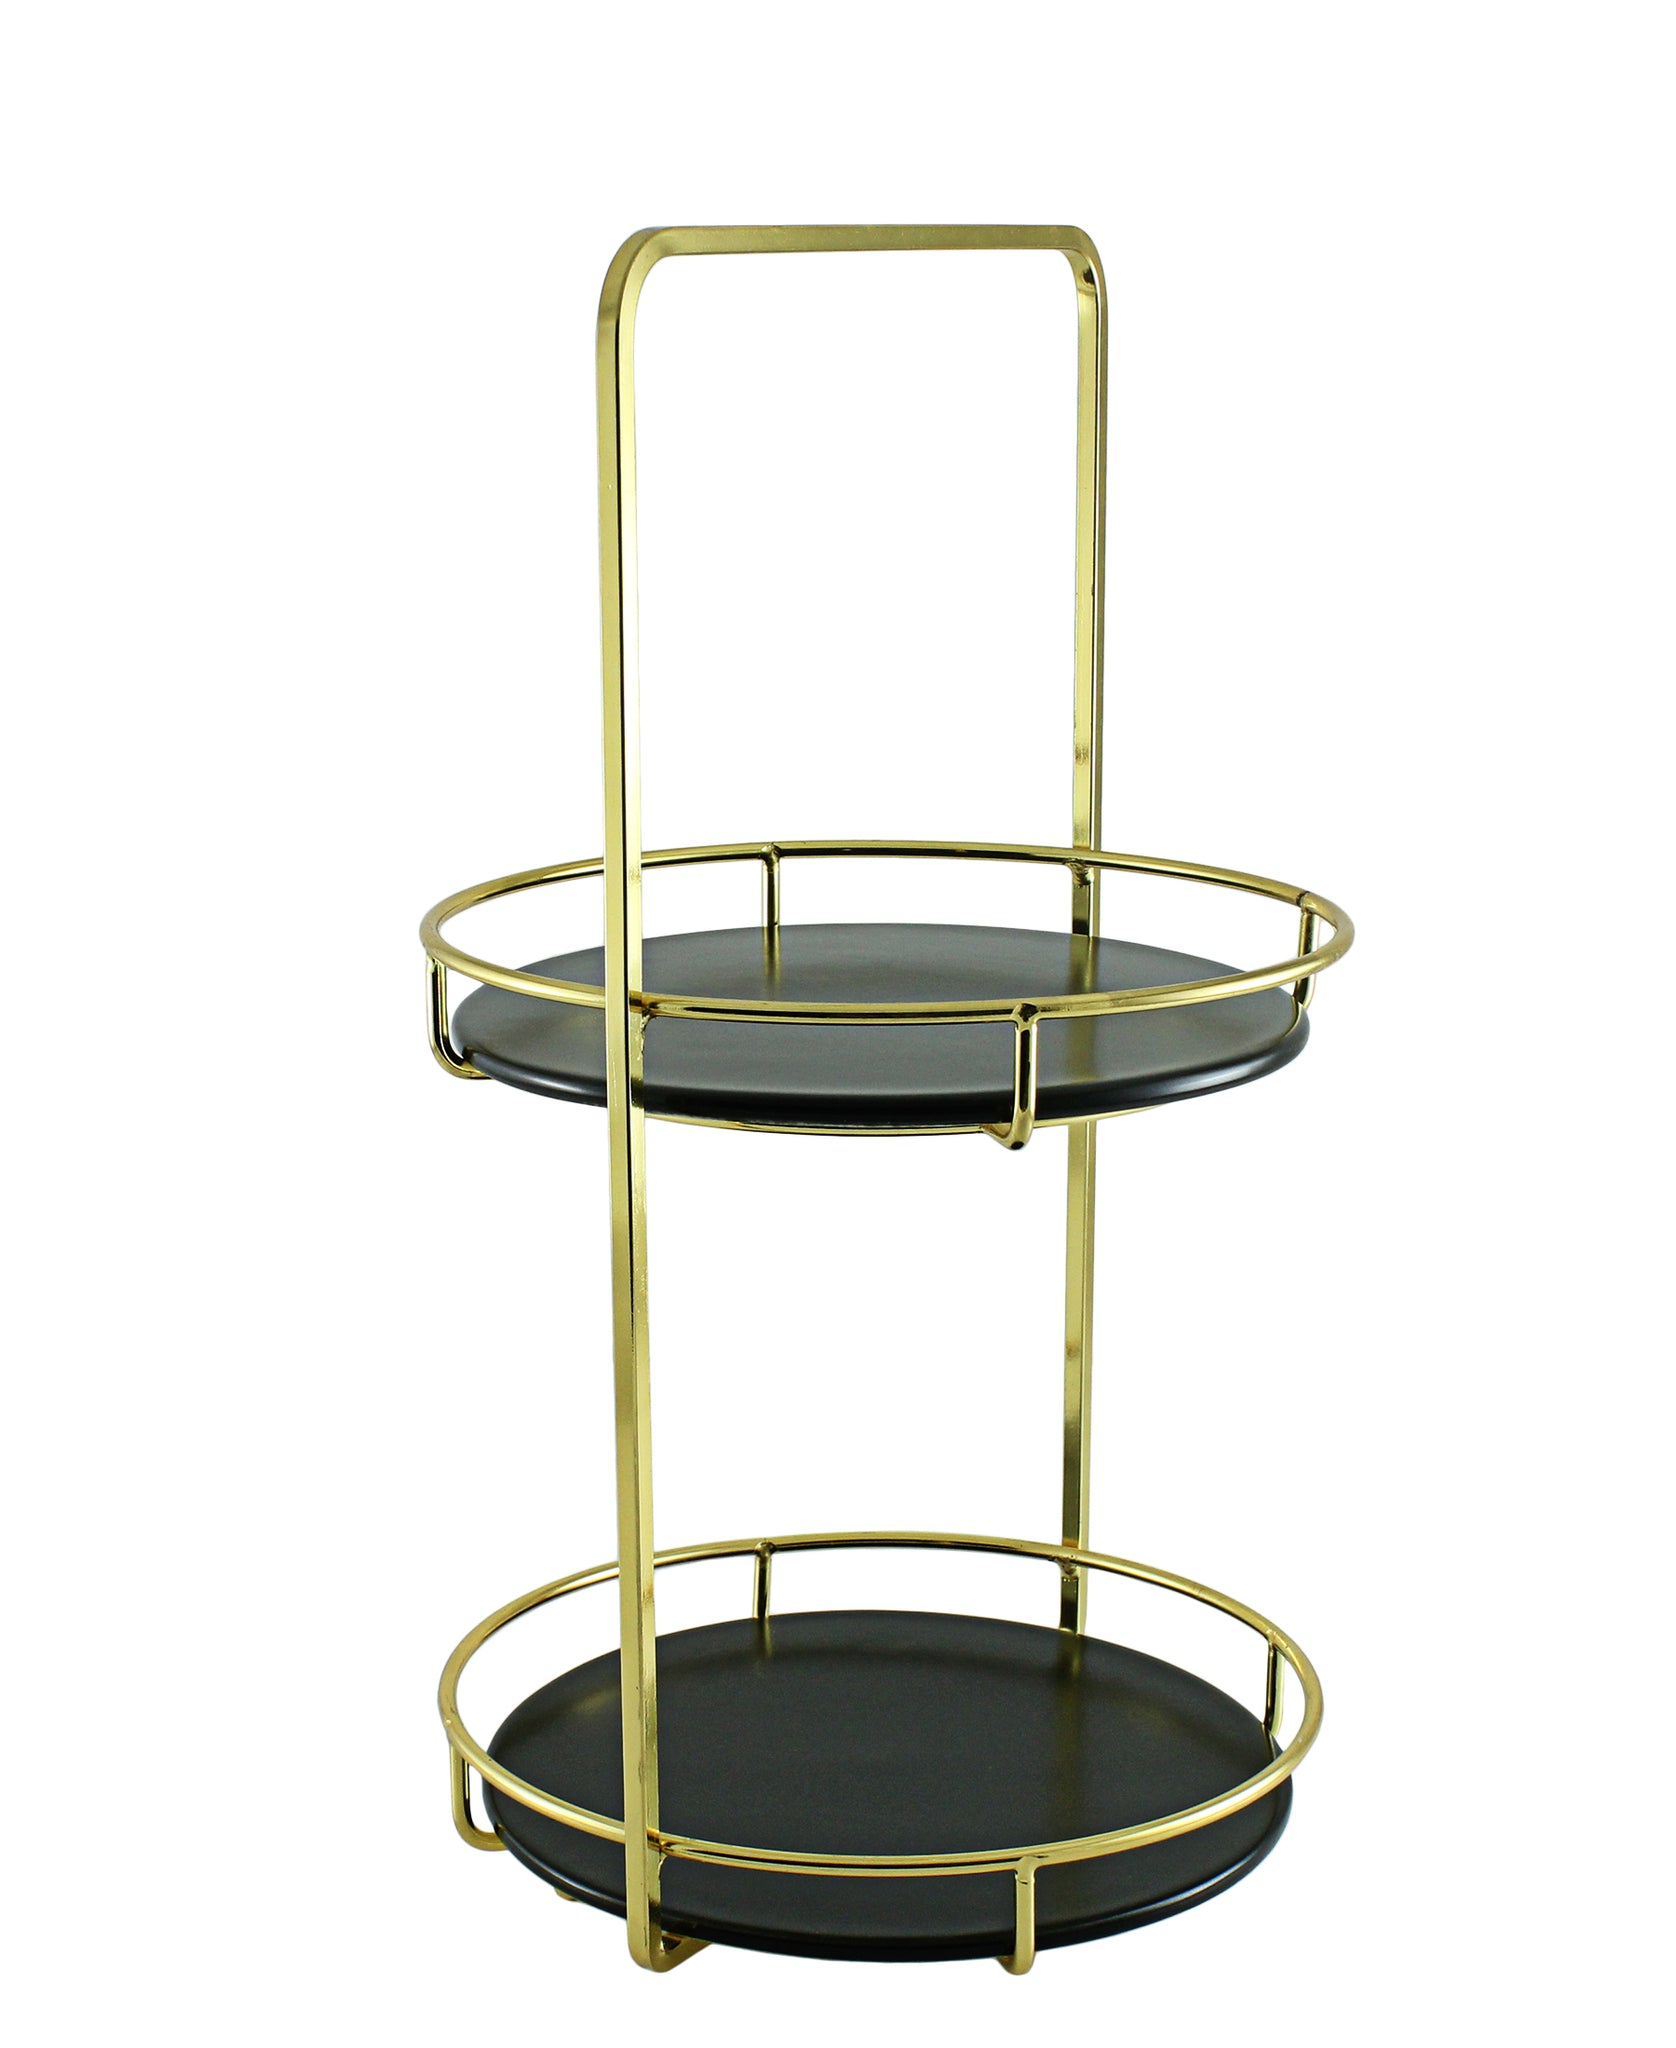 Urban Decor 2 Tier 40cm Stand with Handle - Gold & Black